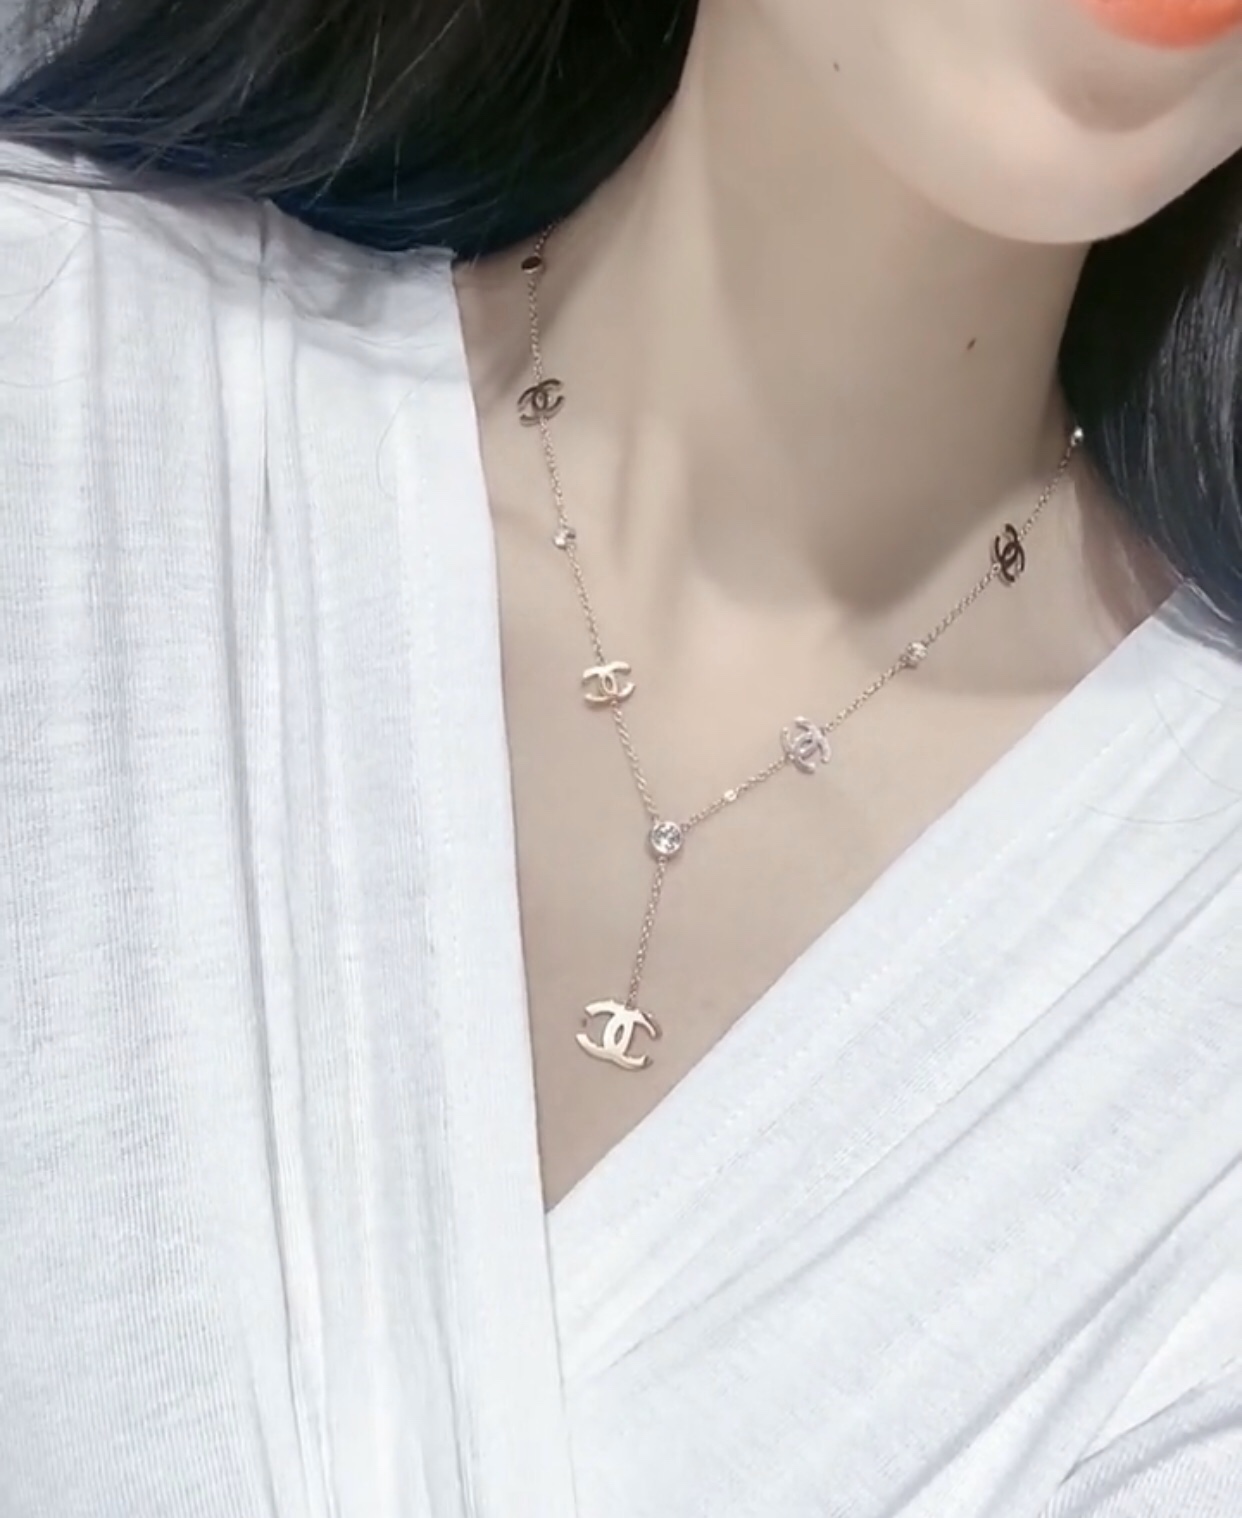 Chanel necklace 108809